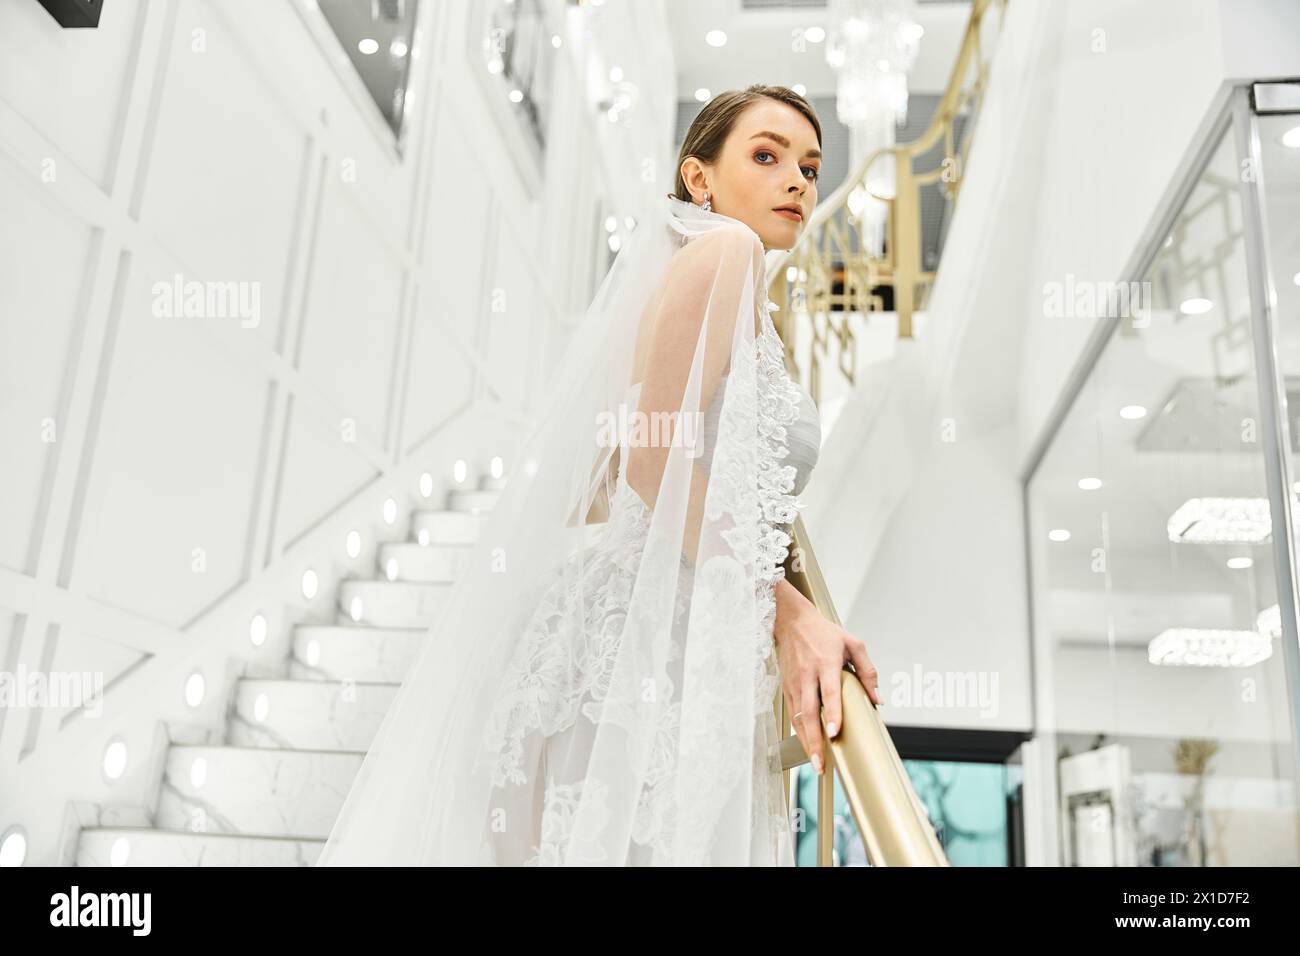 A young brunette bride, dressed in a wedding gown, standing gracefully on a staircase in a bridal salon. Stock Photo